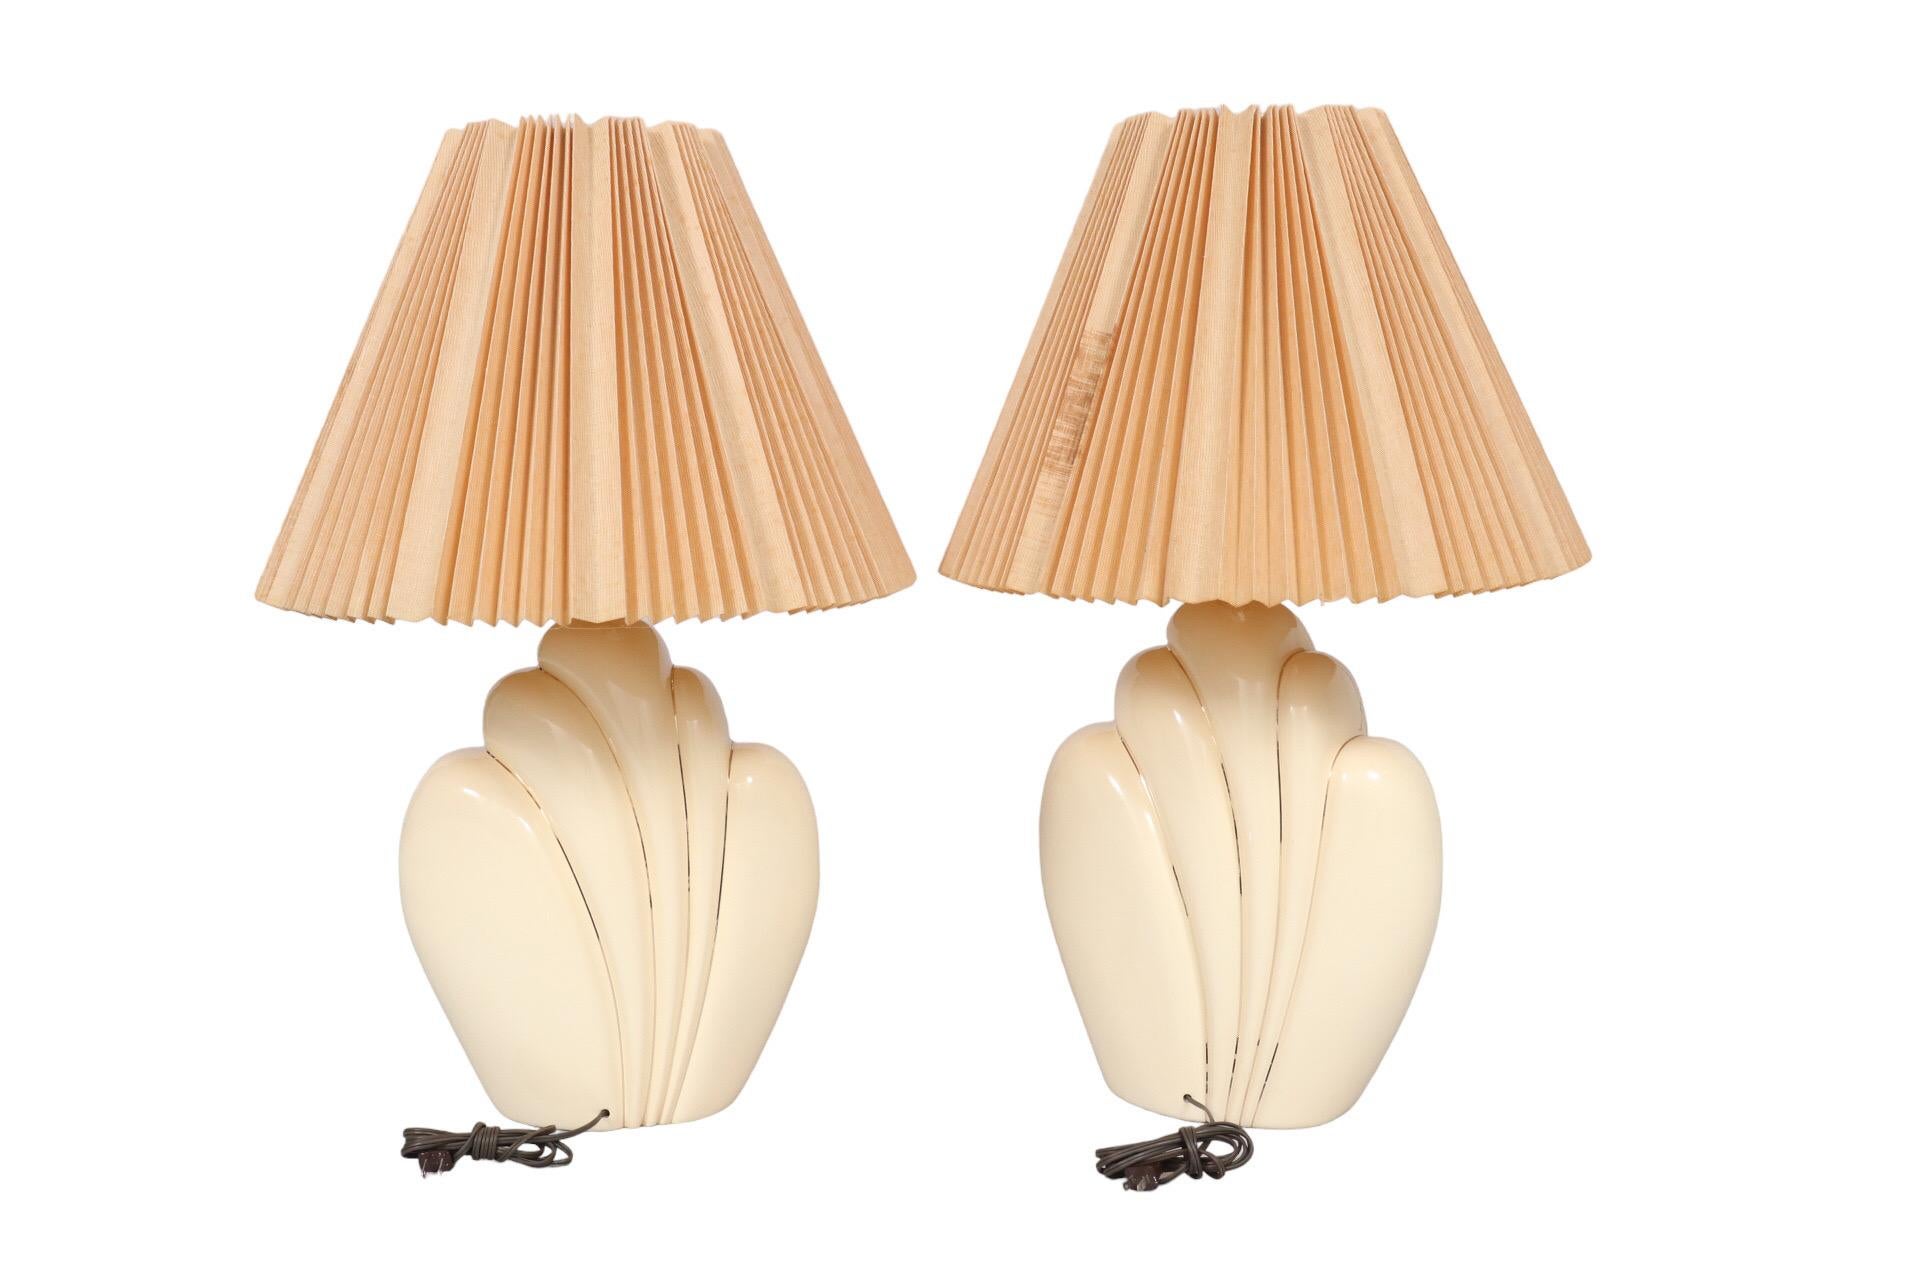 20th Century Sculptural Ceramic Table Lamps, a Pair For Sale